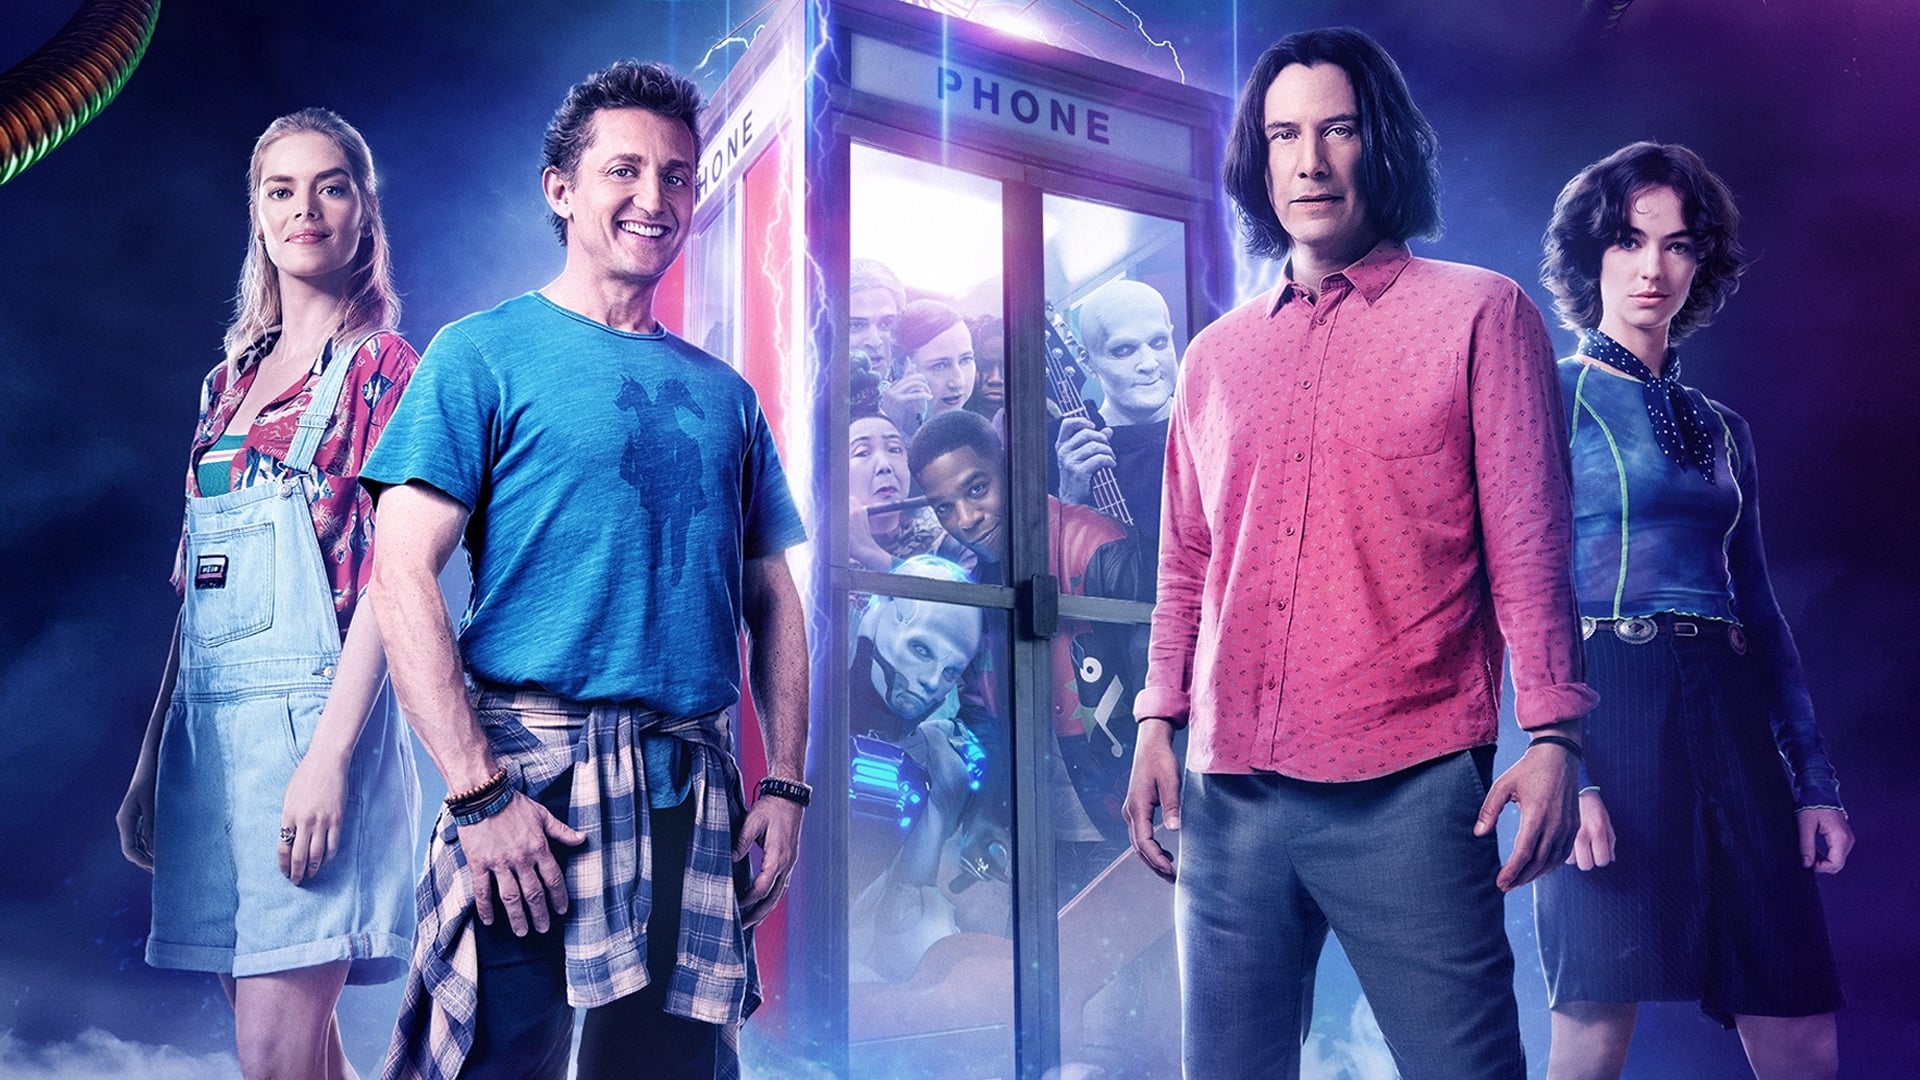 Bill & Ted Face the Music (2020) Movie English Full Movie Watch Online Free